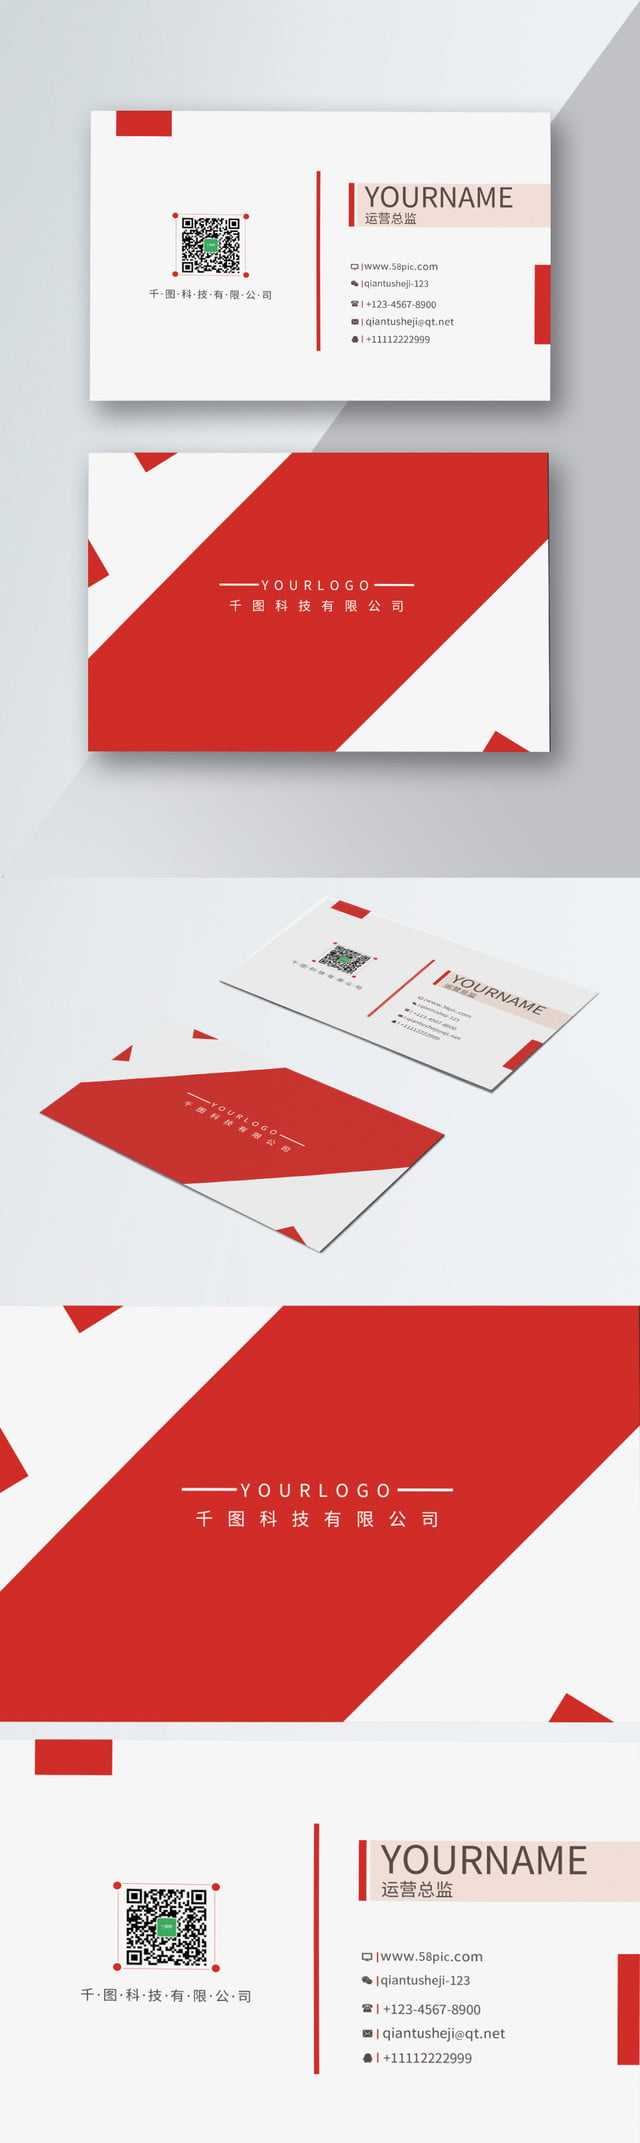 Ccb Business Card Construction Bank Ccb Business Card Throughout Construction Business Card Templates Download Free